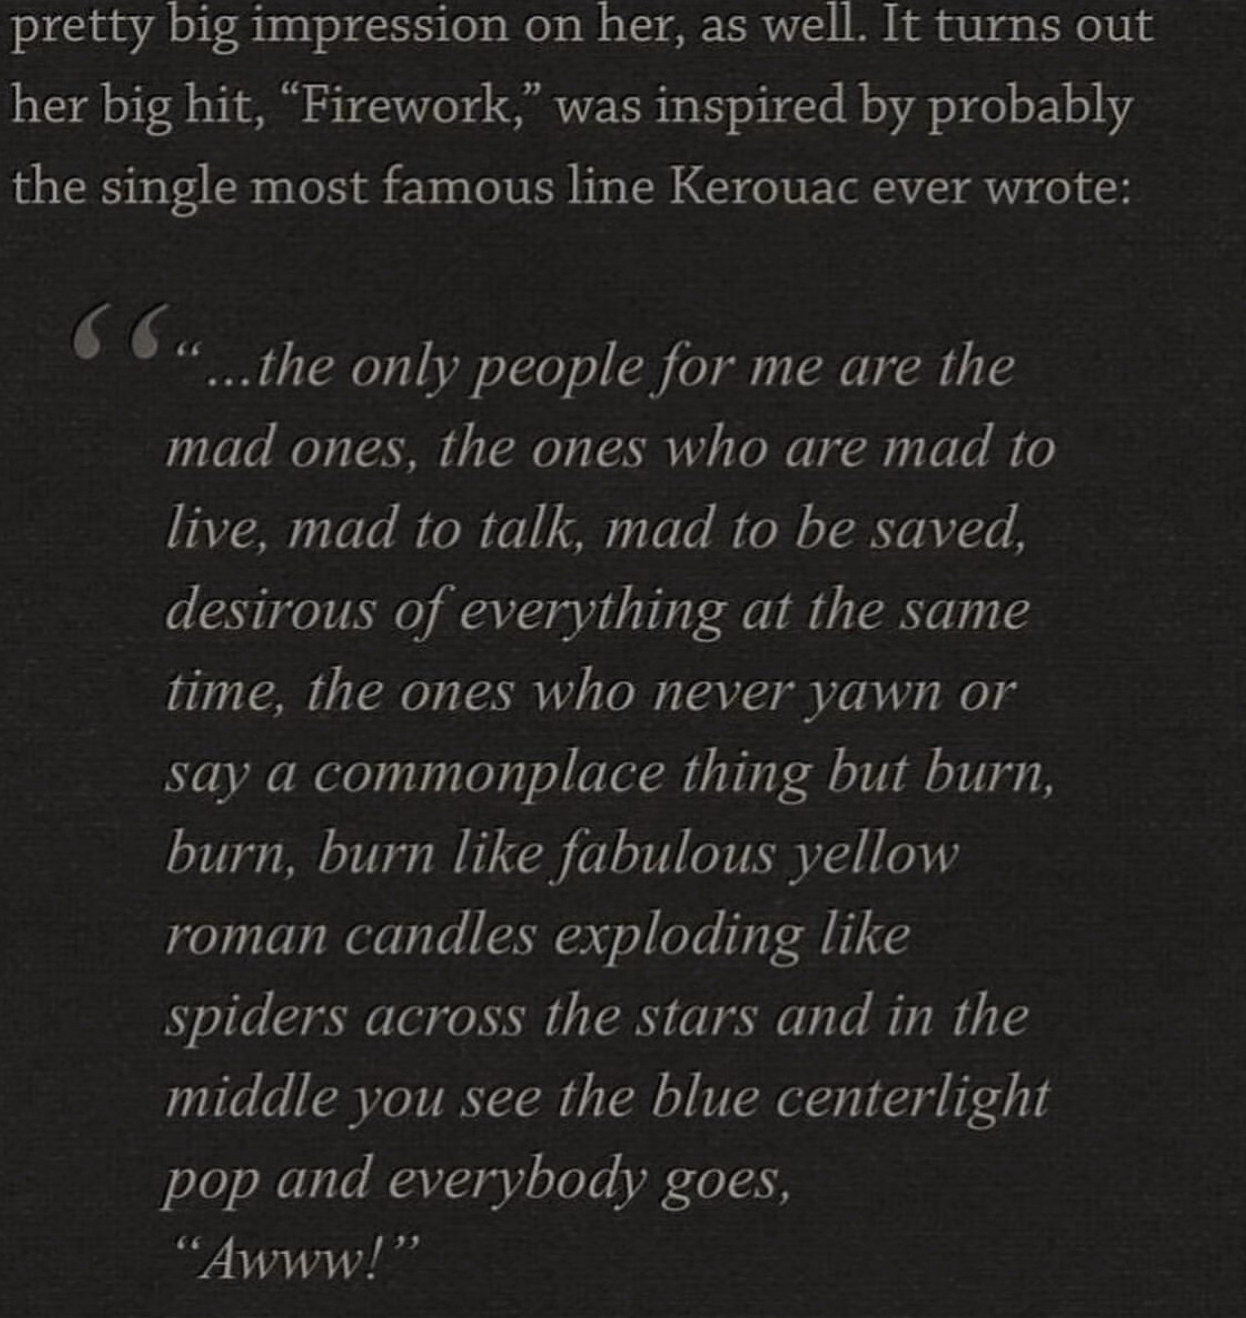 Passage from &quot;On the Road&quot; that reads: &quot;The only people for me are the mad ones, the ones who are mad to live, mad to talk, mad to be saved...&quot;